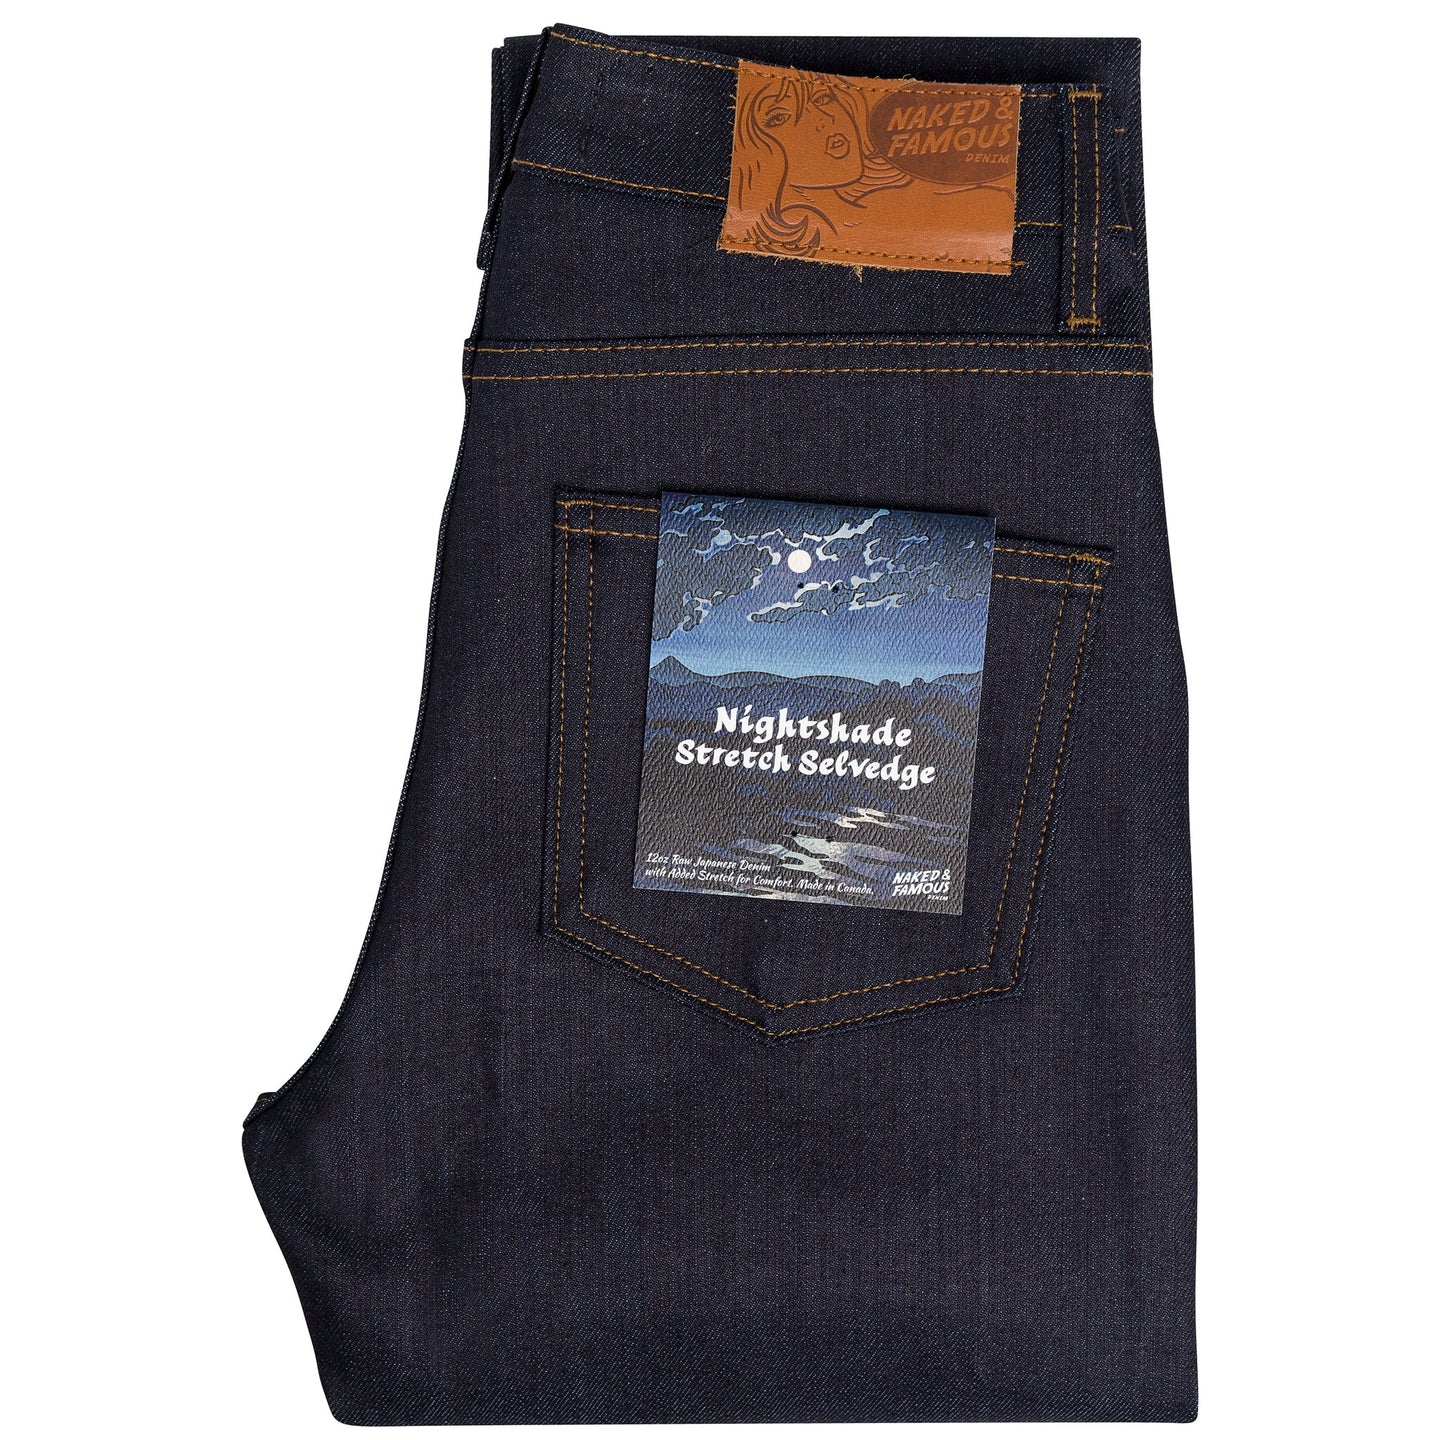 Women's - High Skinny - Nightshade Stretch Selvedge | Naked & Famous Denim 